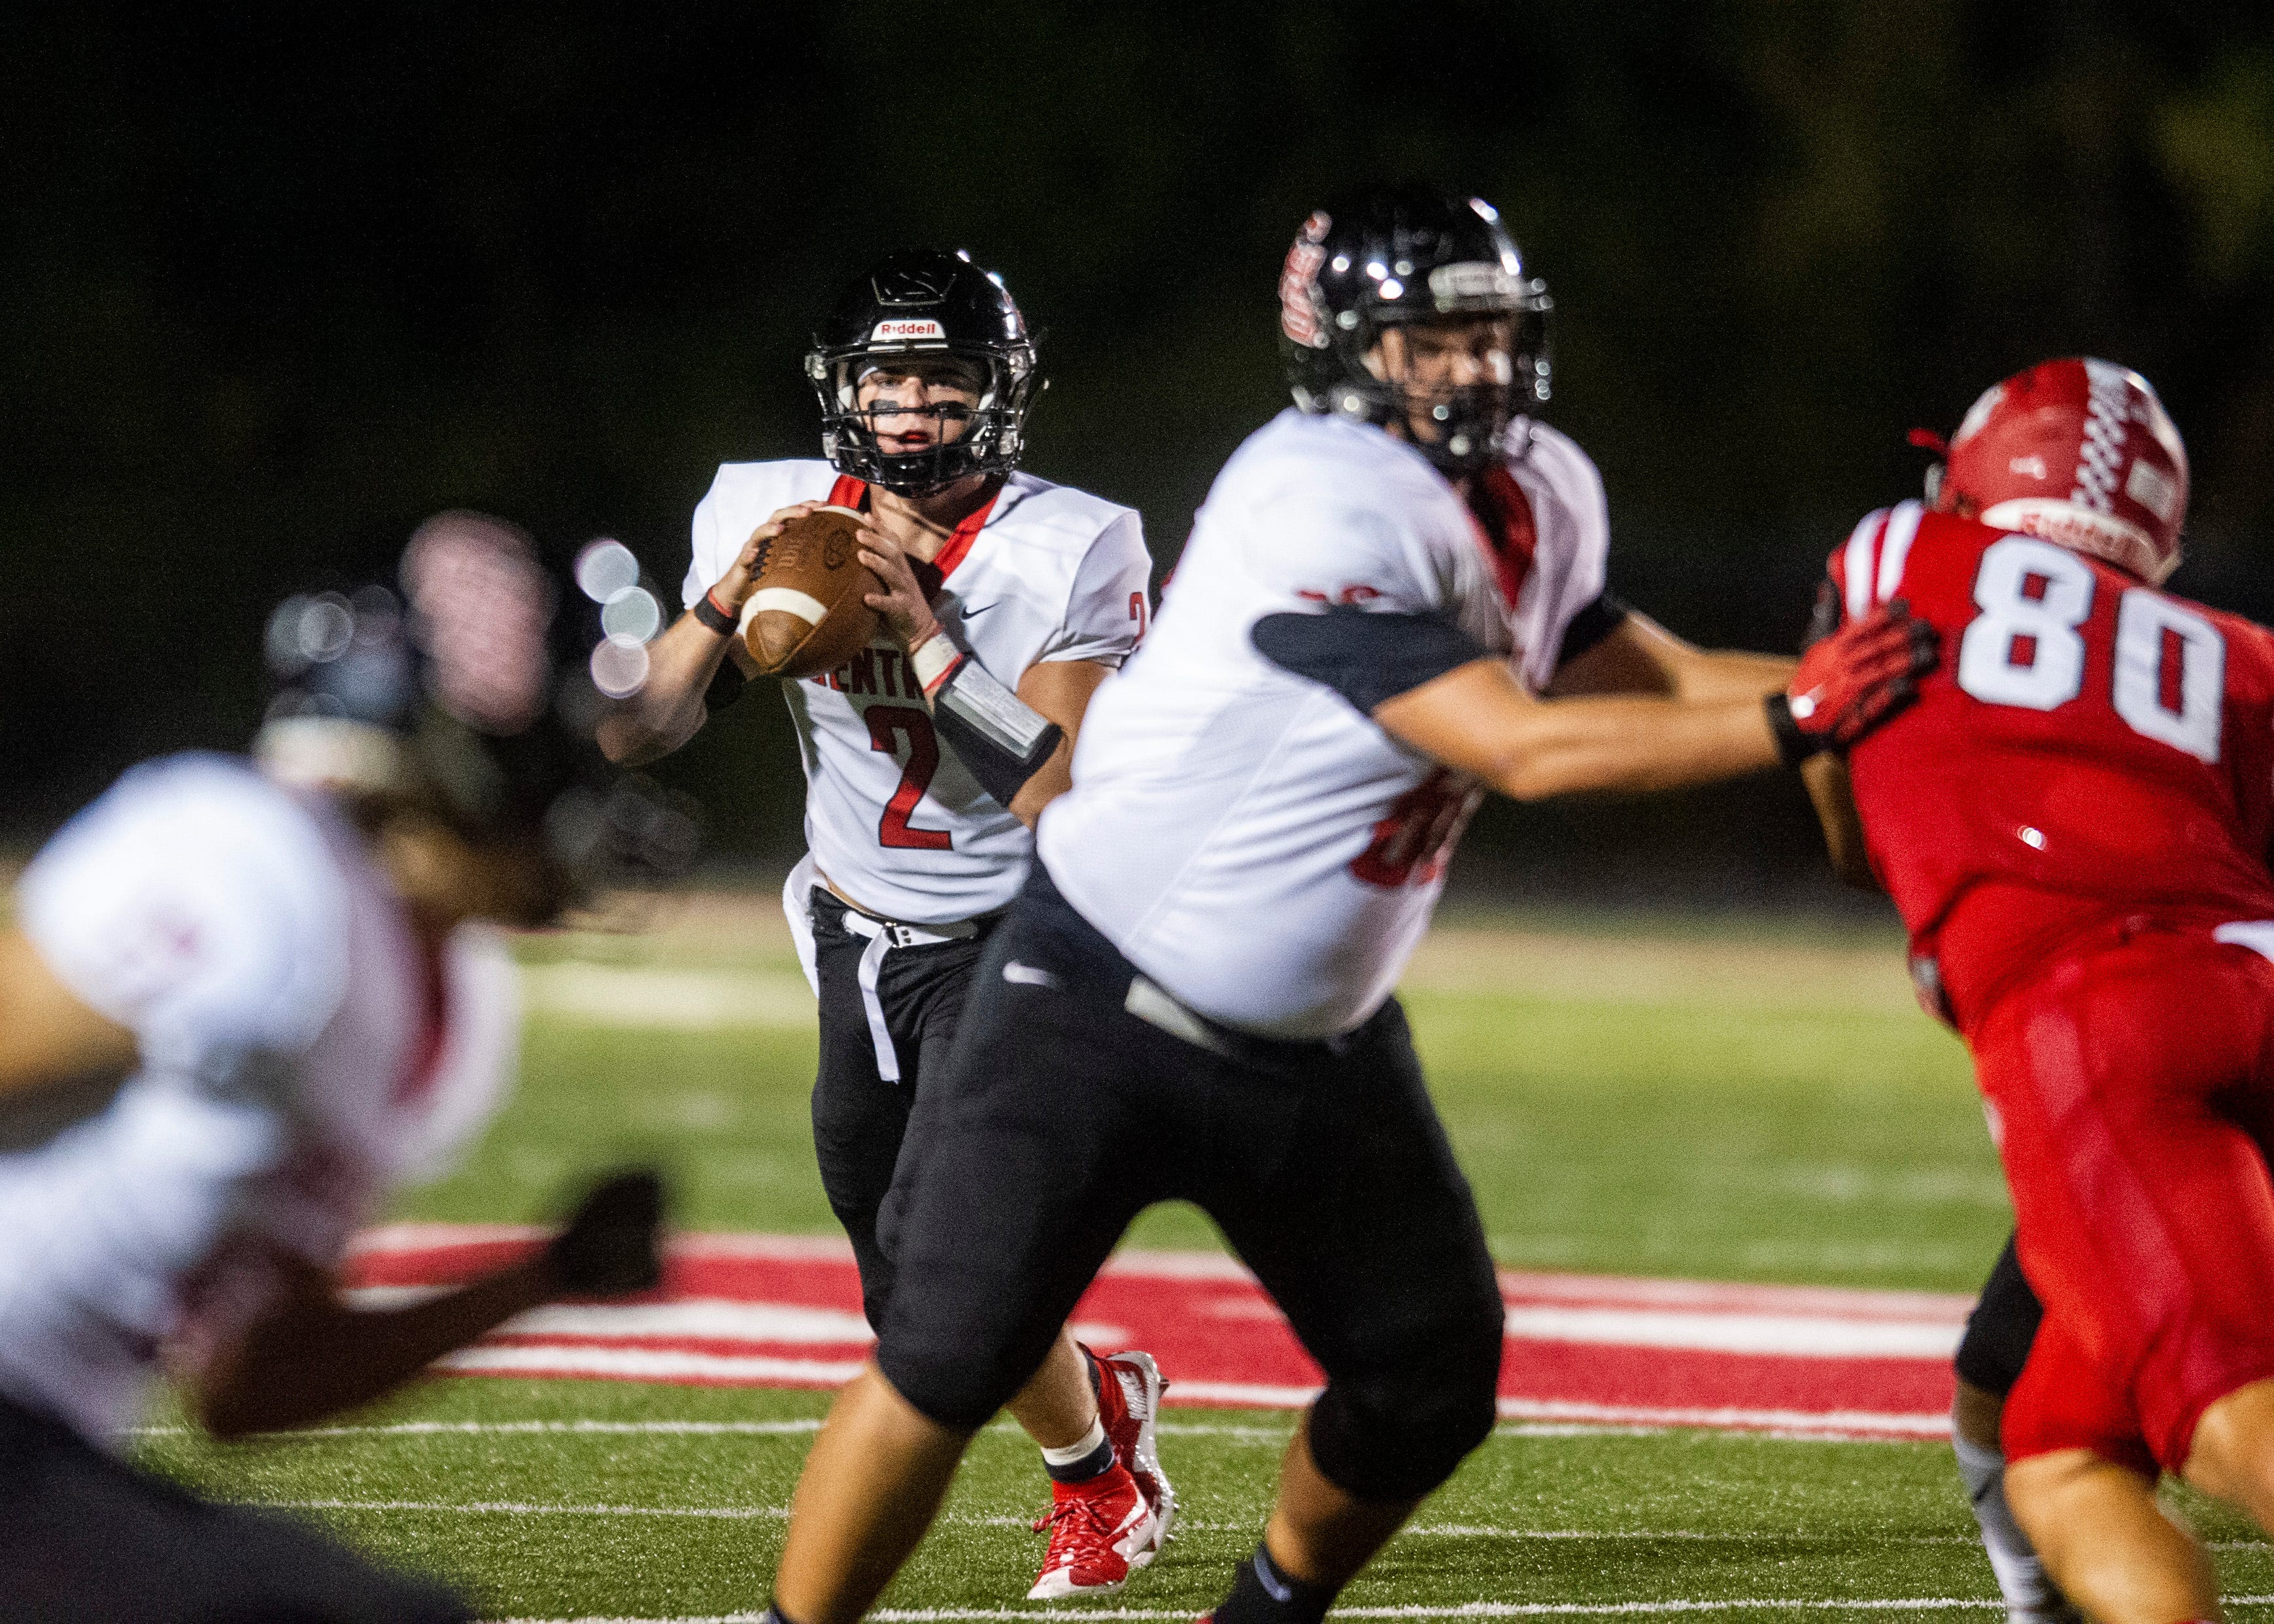 Central's Dakota Fawver (2) looks for a pass during the Halls and Central high school football game on Friday, October 4, 2019 at Halls High School.